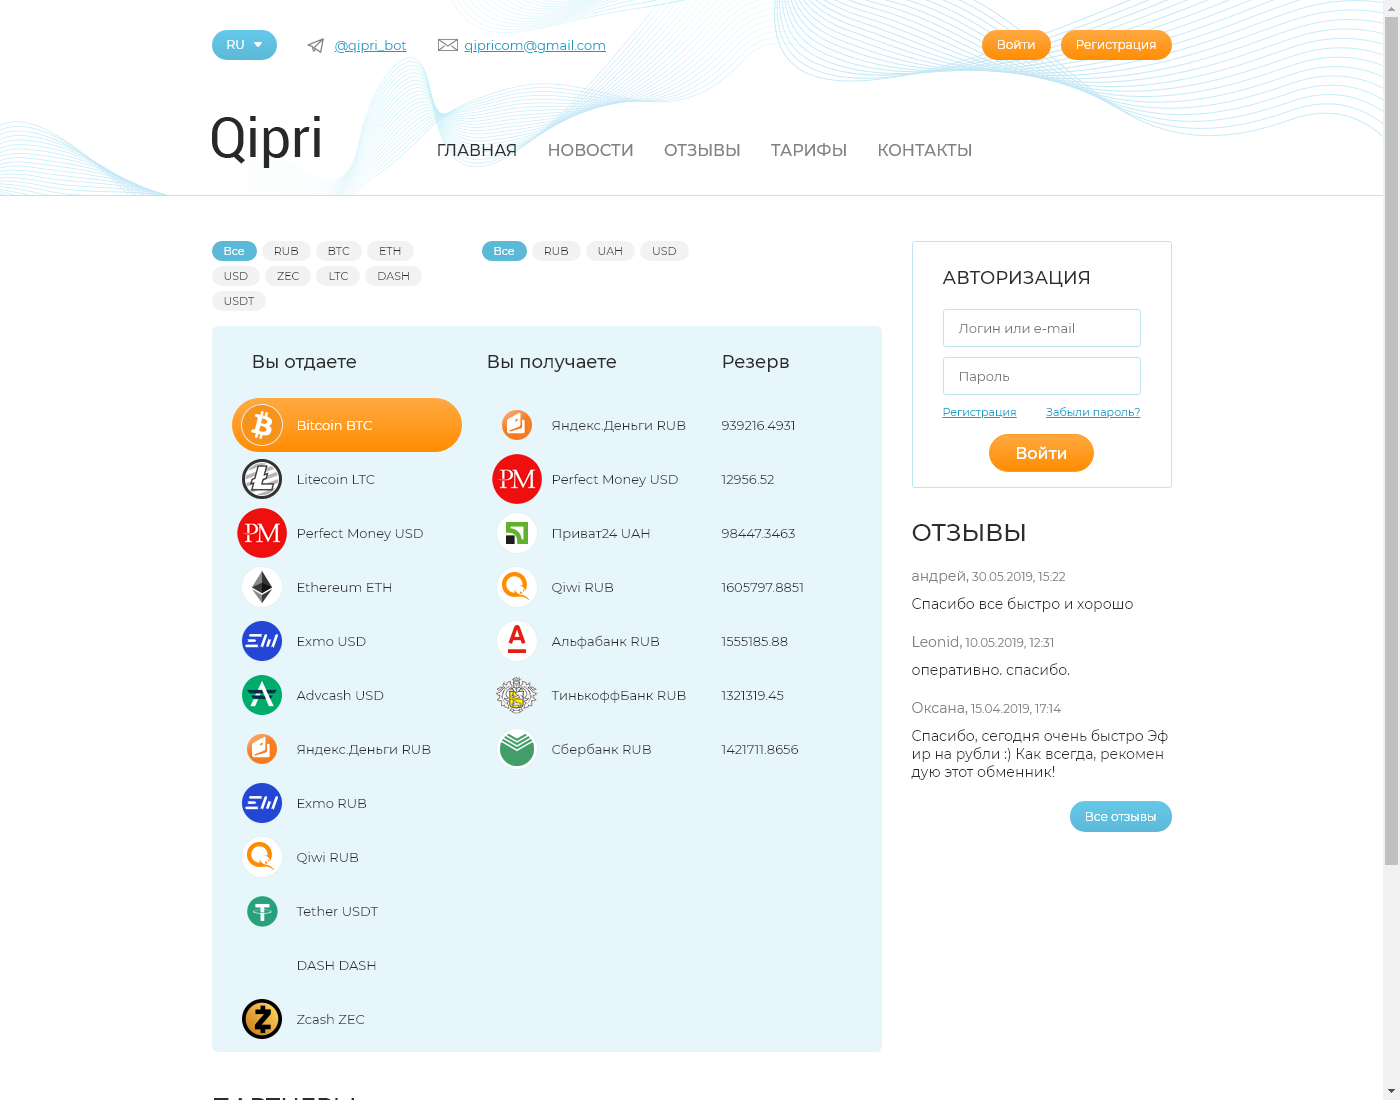 Qipri user interface: the home page in English